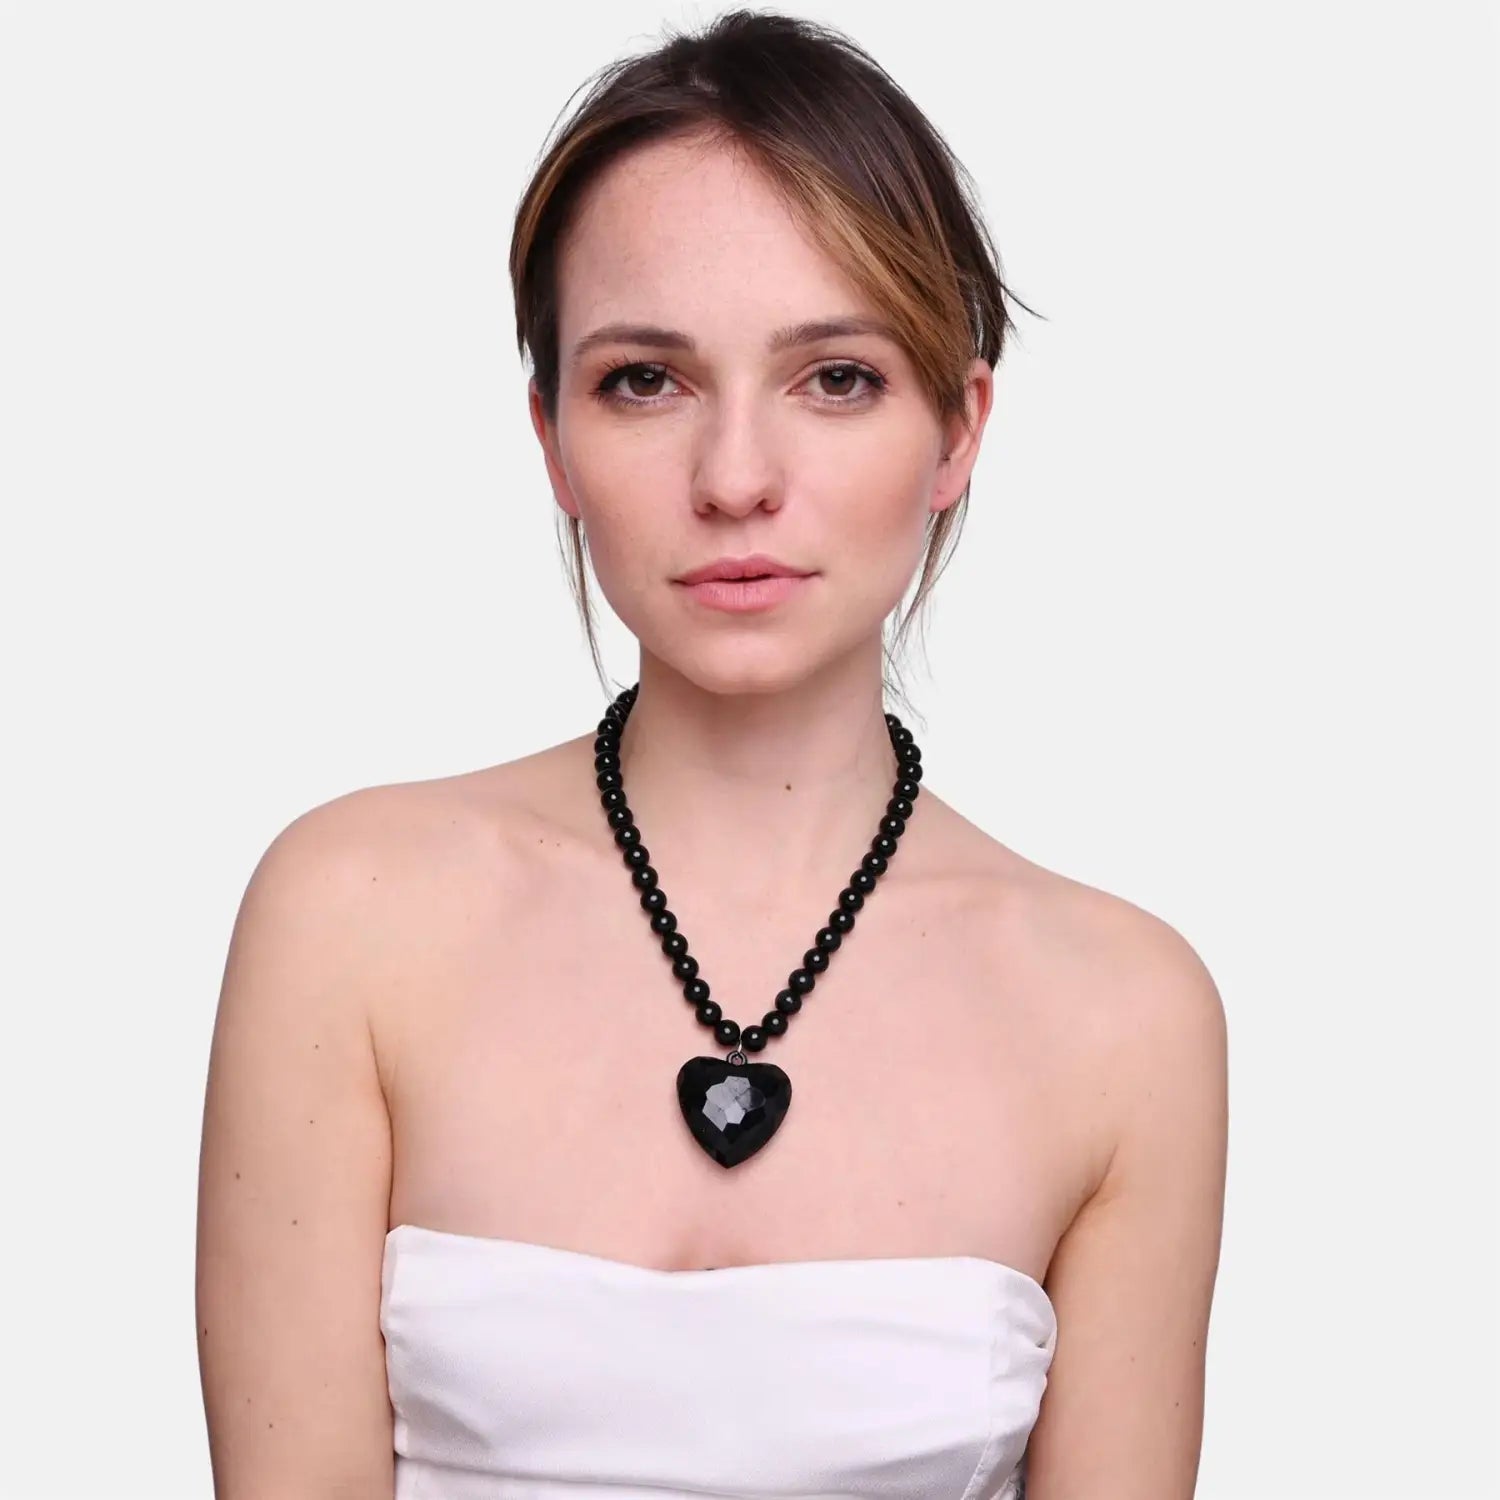 Heart charm ball chain necklace with lightweight plastic design.